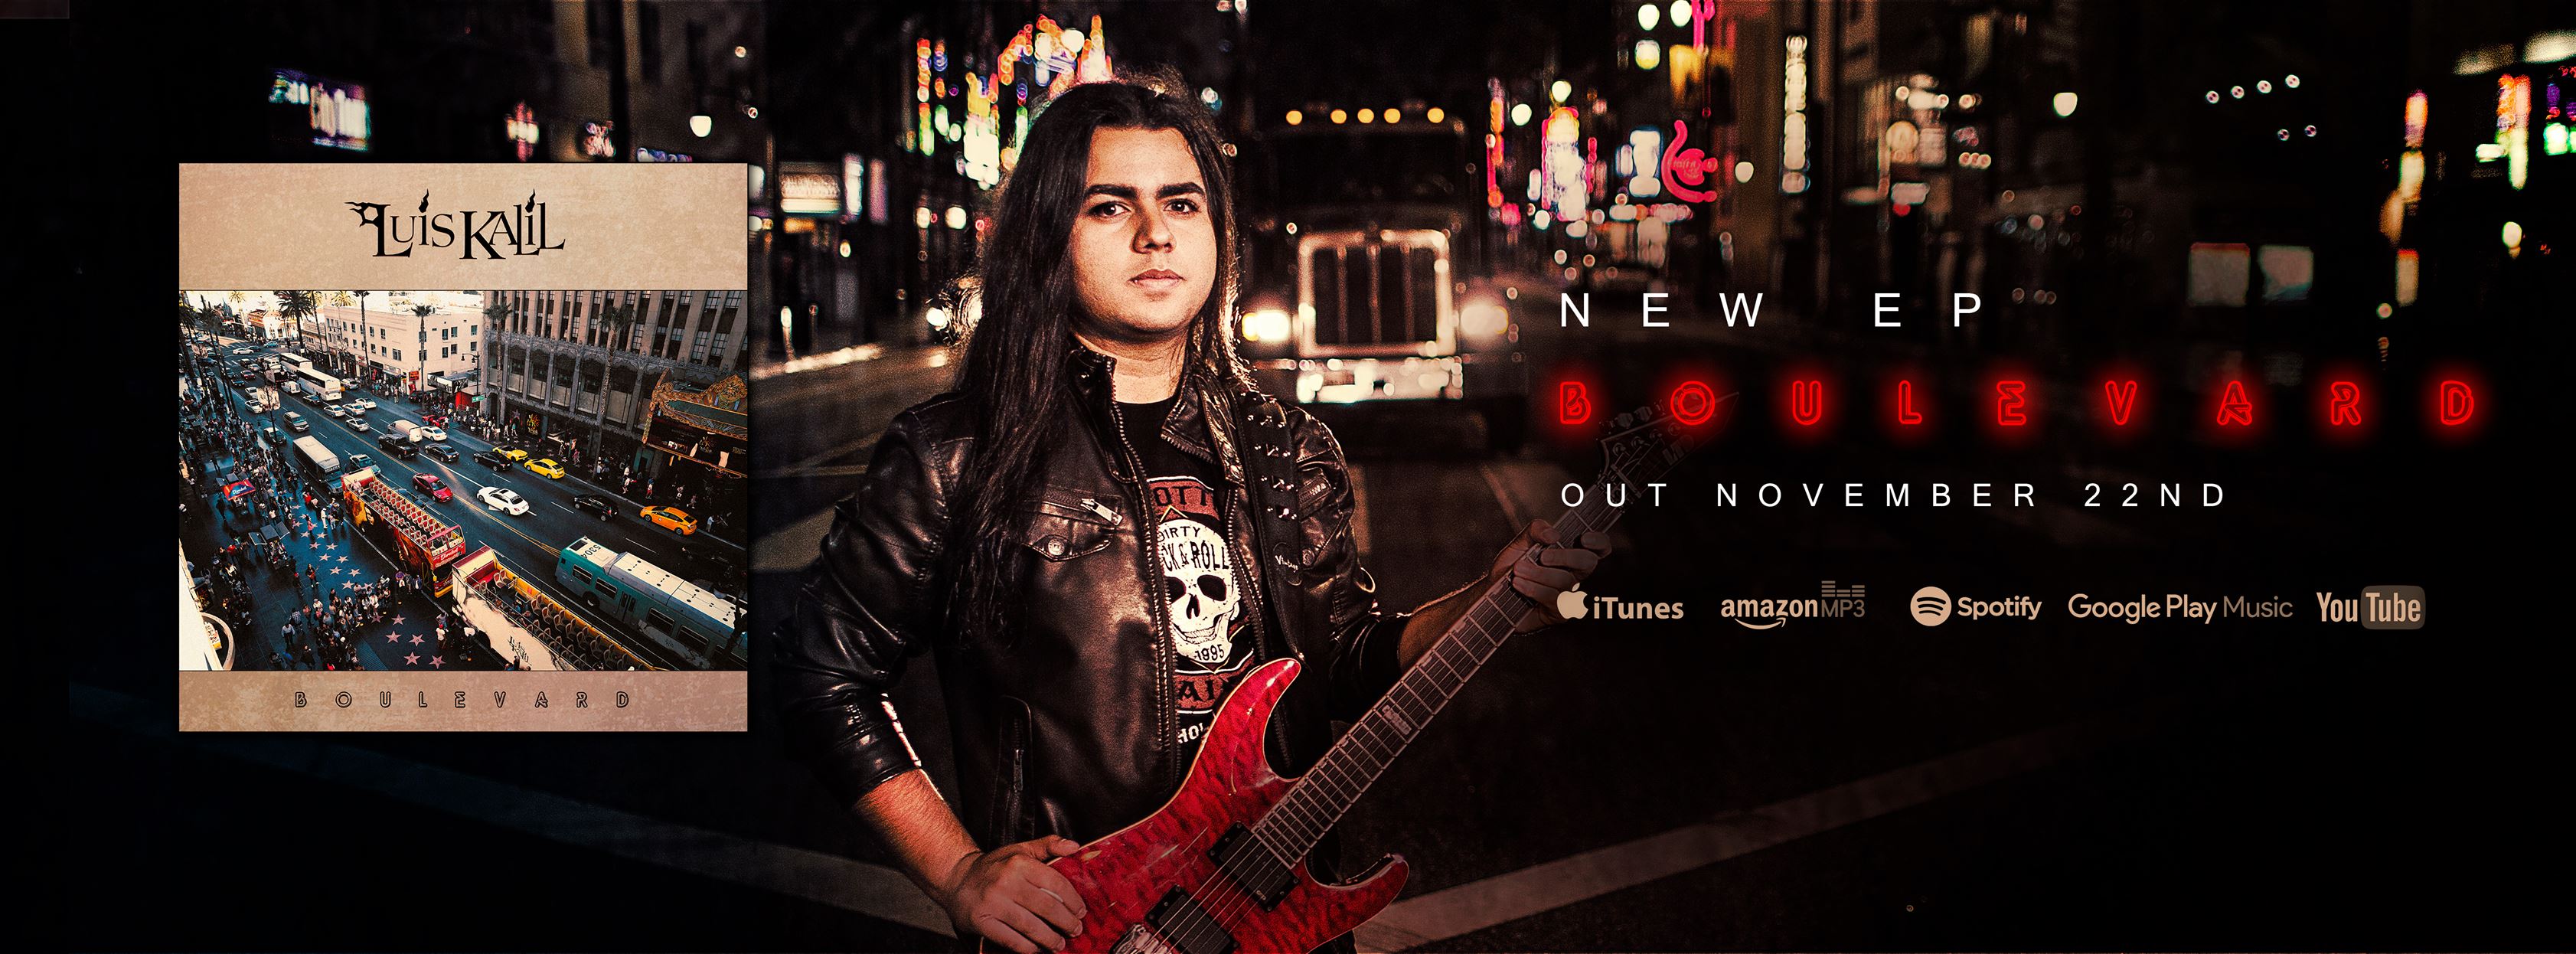 SEVENTEEN-YEAR-OLD GUITARIST LUIS KALIL PREMIERES VIDEO FOR NEW SONG BOULEVARD TODAY